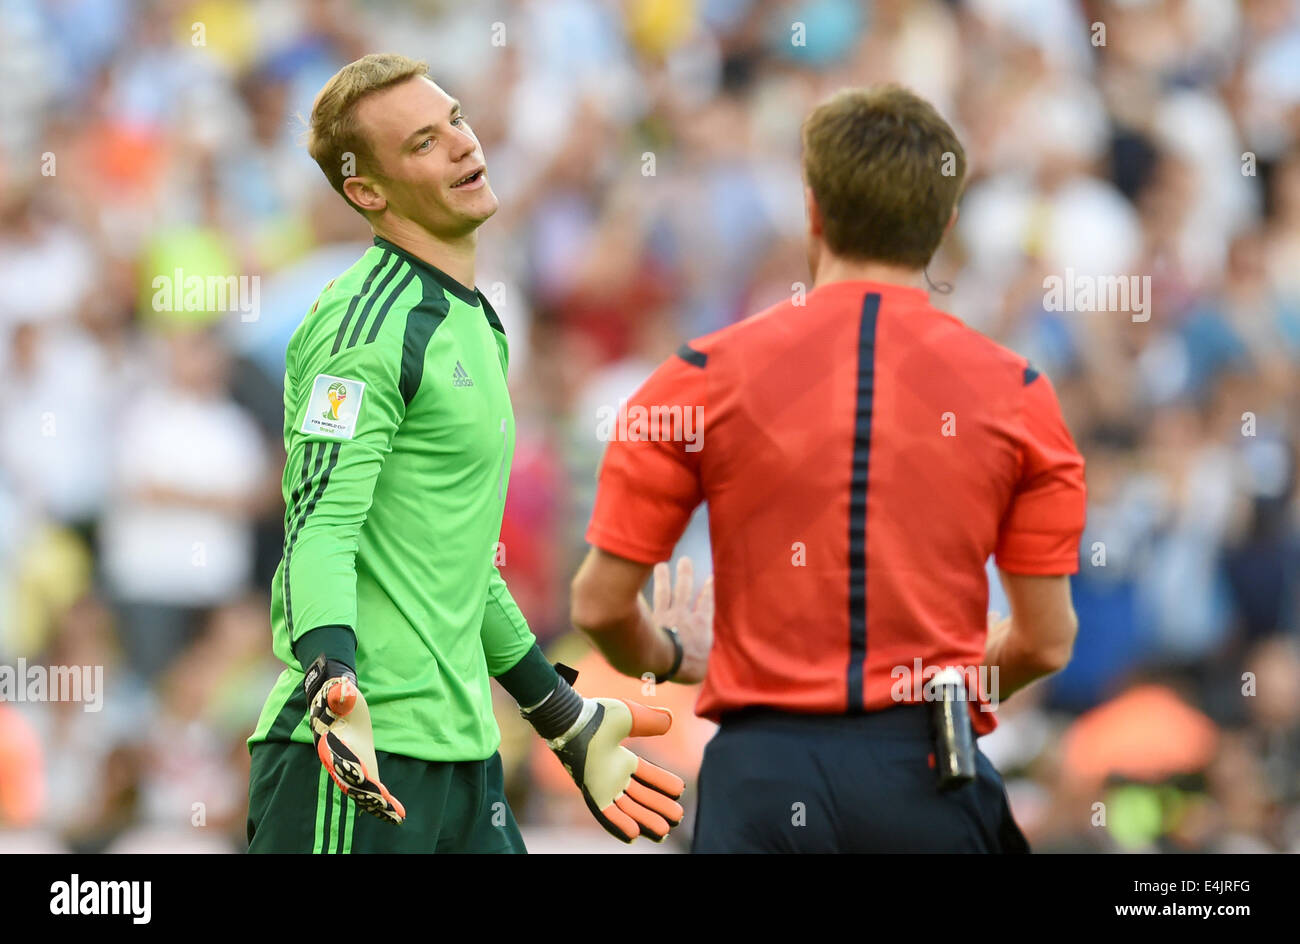 Rio de Janeiro, Brazil. 13th July, 2014. Goalkeeper Manuel Neuer (L) of Germany argues with Italian referee Nicola Rizzoli during the FIFA World Cup 2014 final soccer match between Germany and Argentina at the Estadio do Maracana in Rio de Janeiro, Brazil, 13 July 2014. Photo: Andreas Gebert/dpa/Alamy Live News Stock Photo